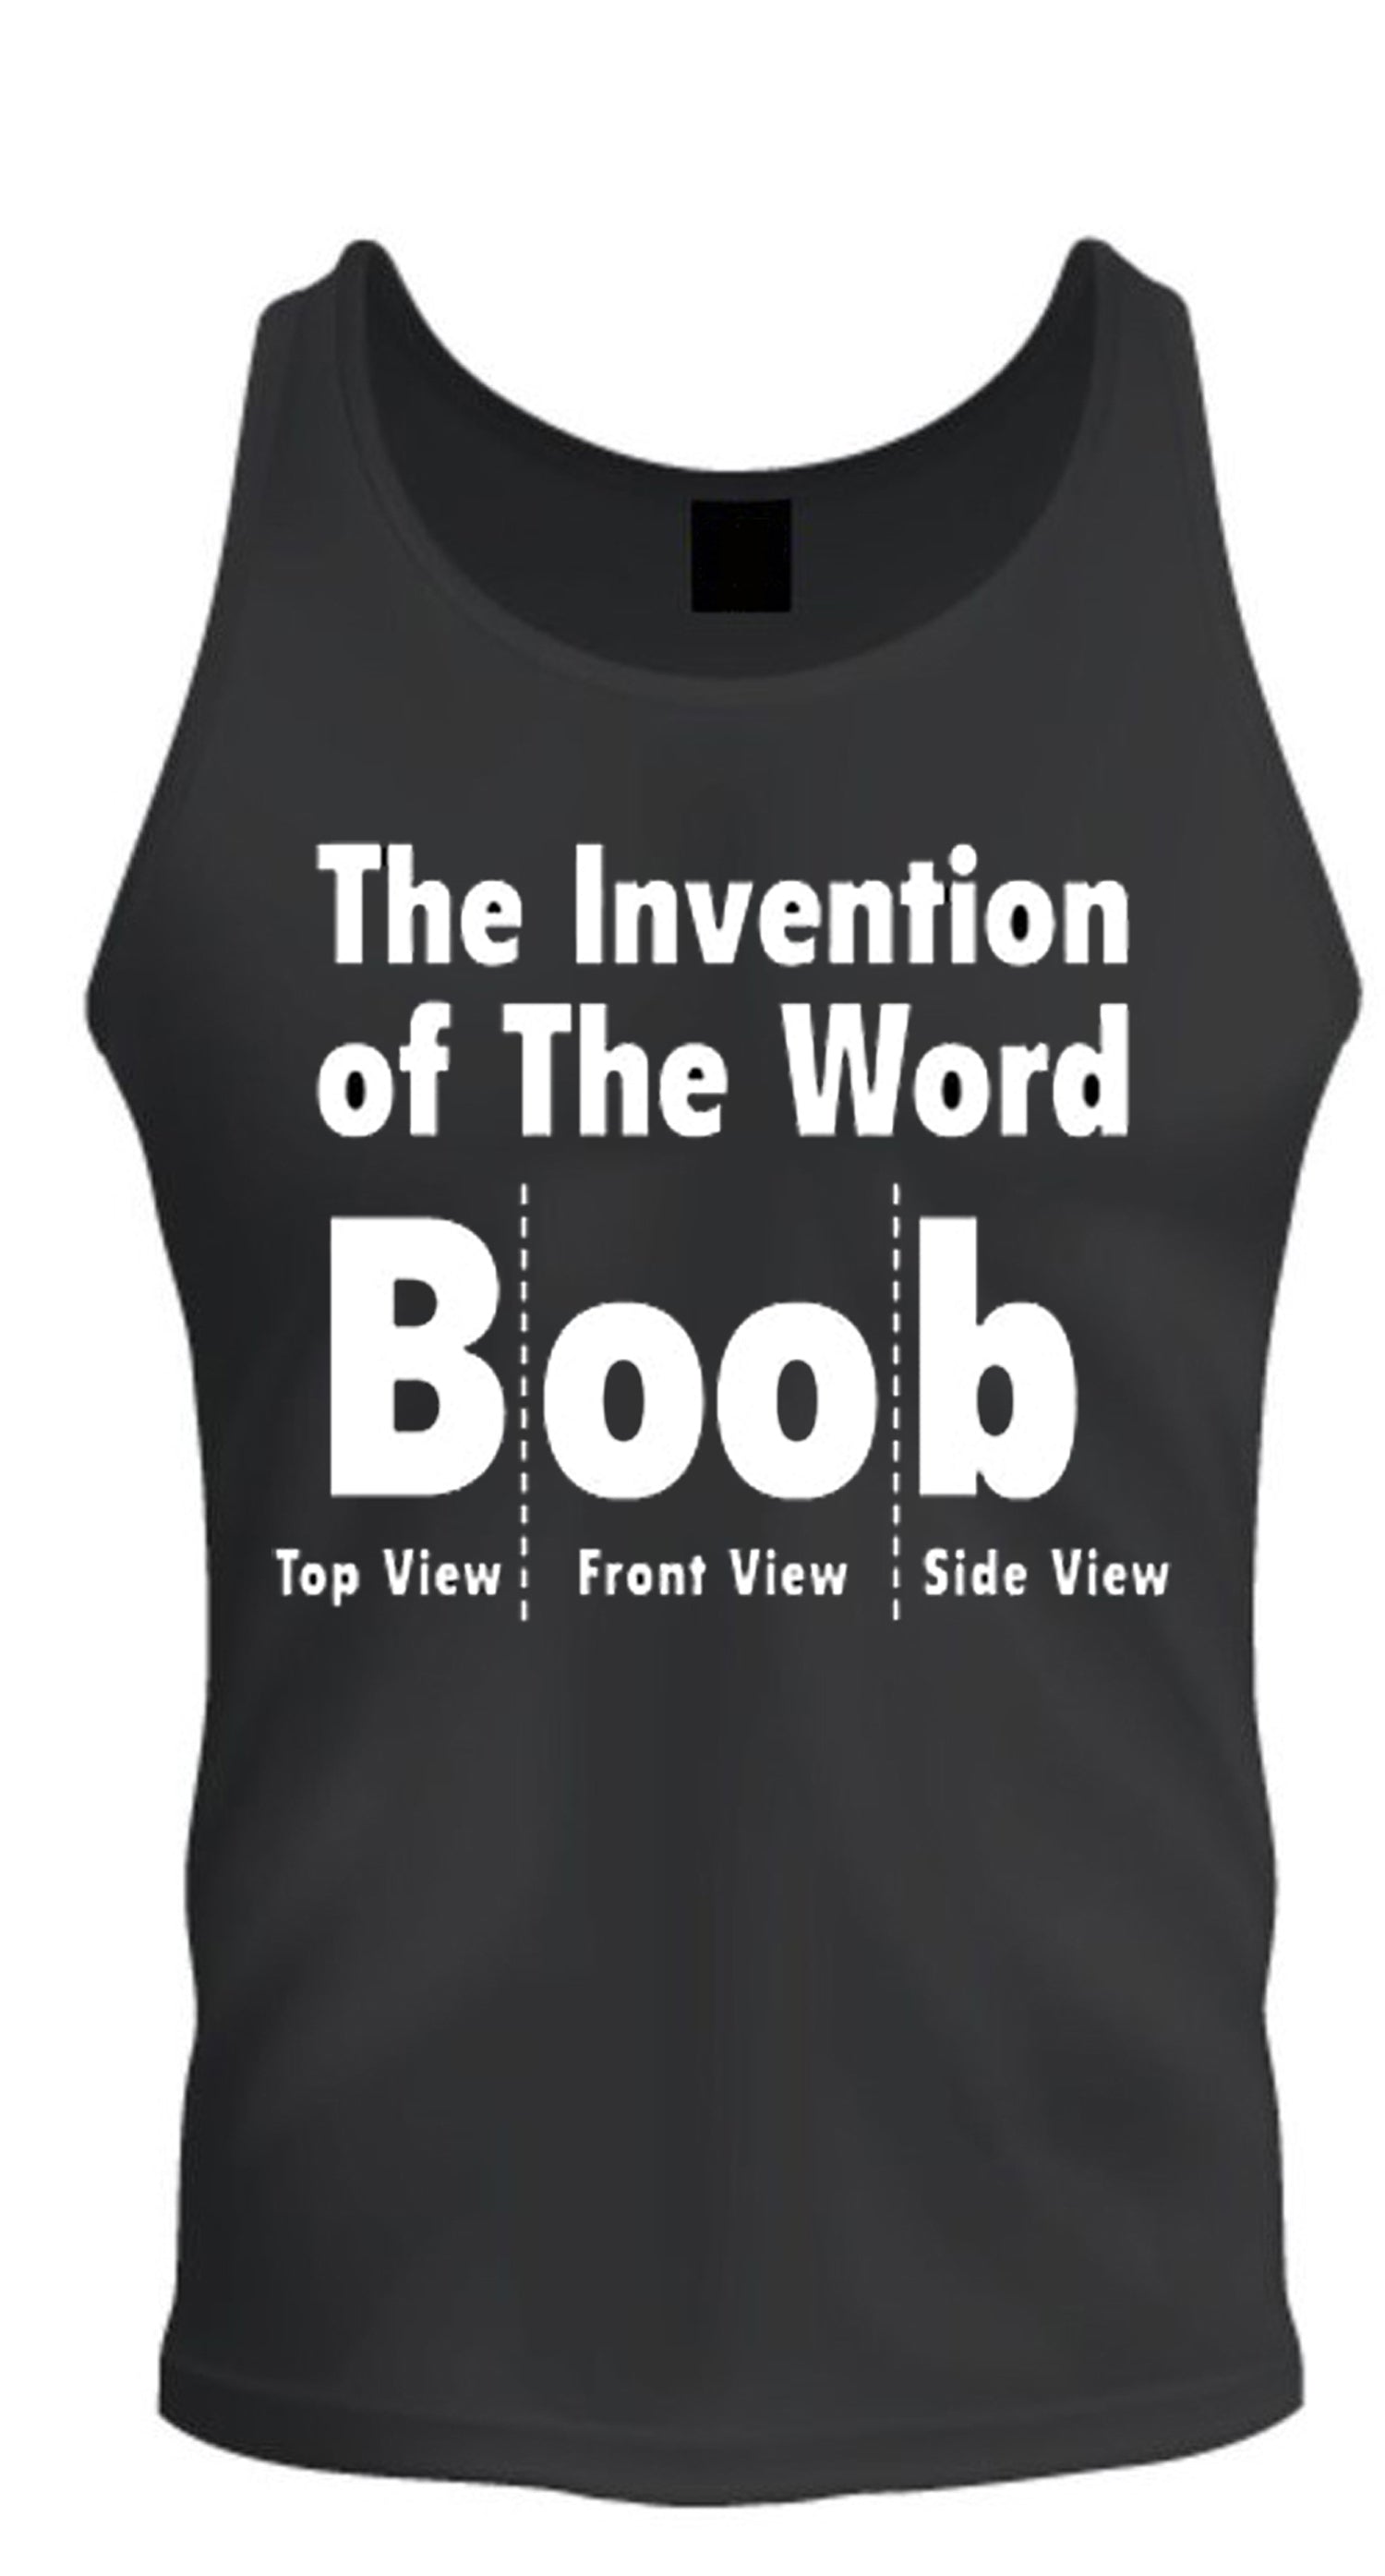 The Invention of The Word BOOB Black Tee Tank Top S-2XL – Planet T-Shirts